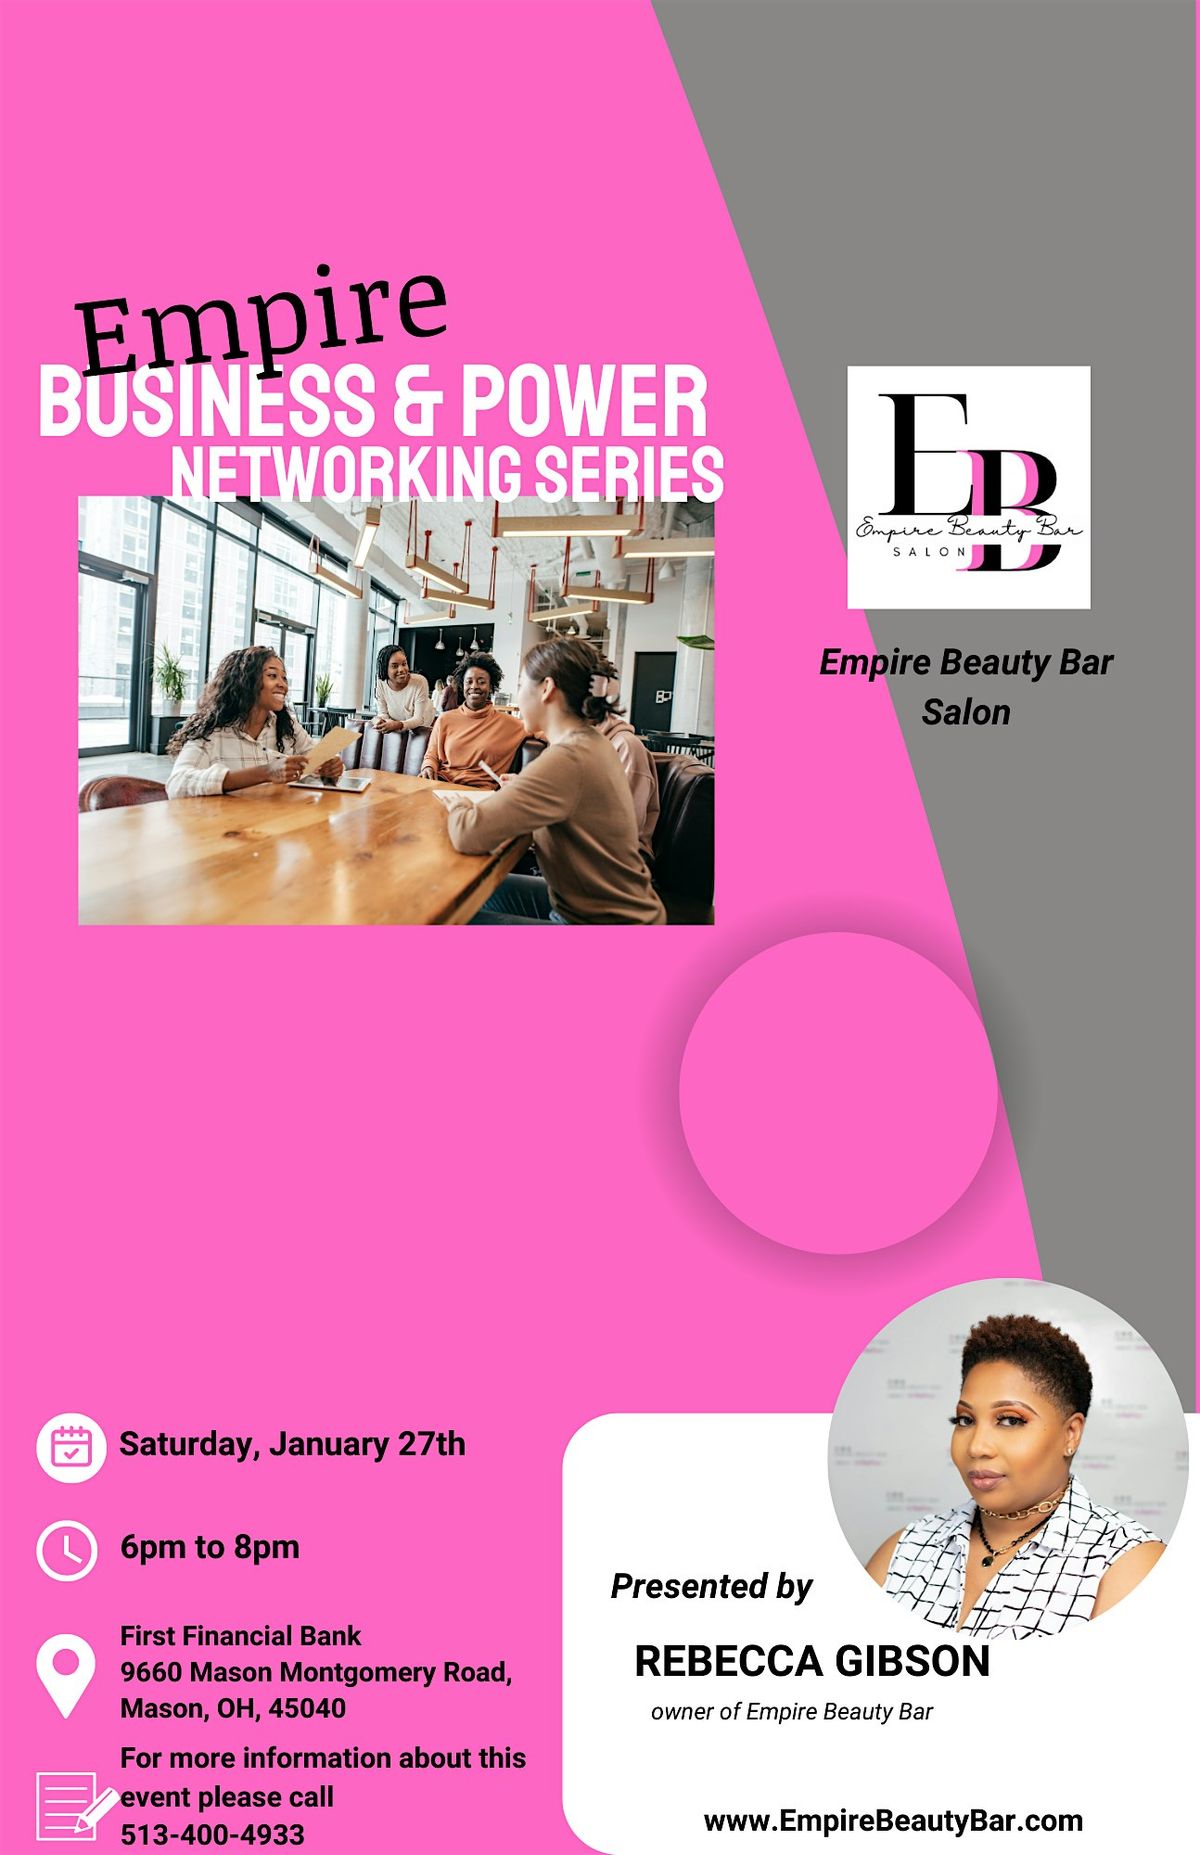 Empire Business & Power Networking Series